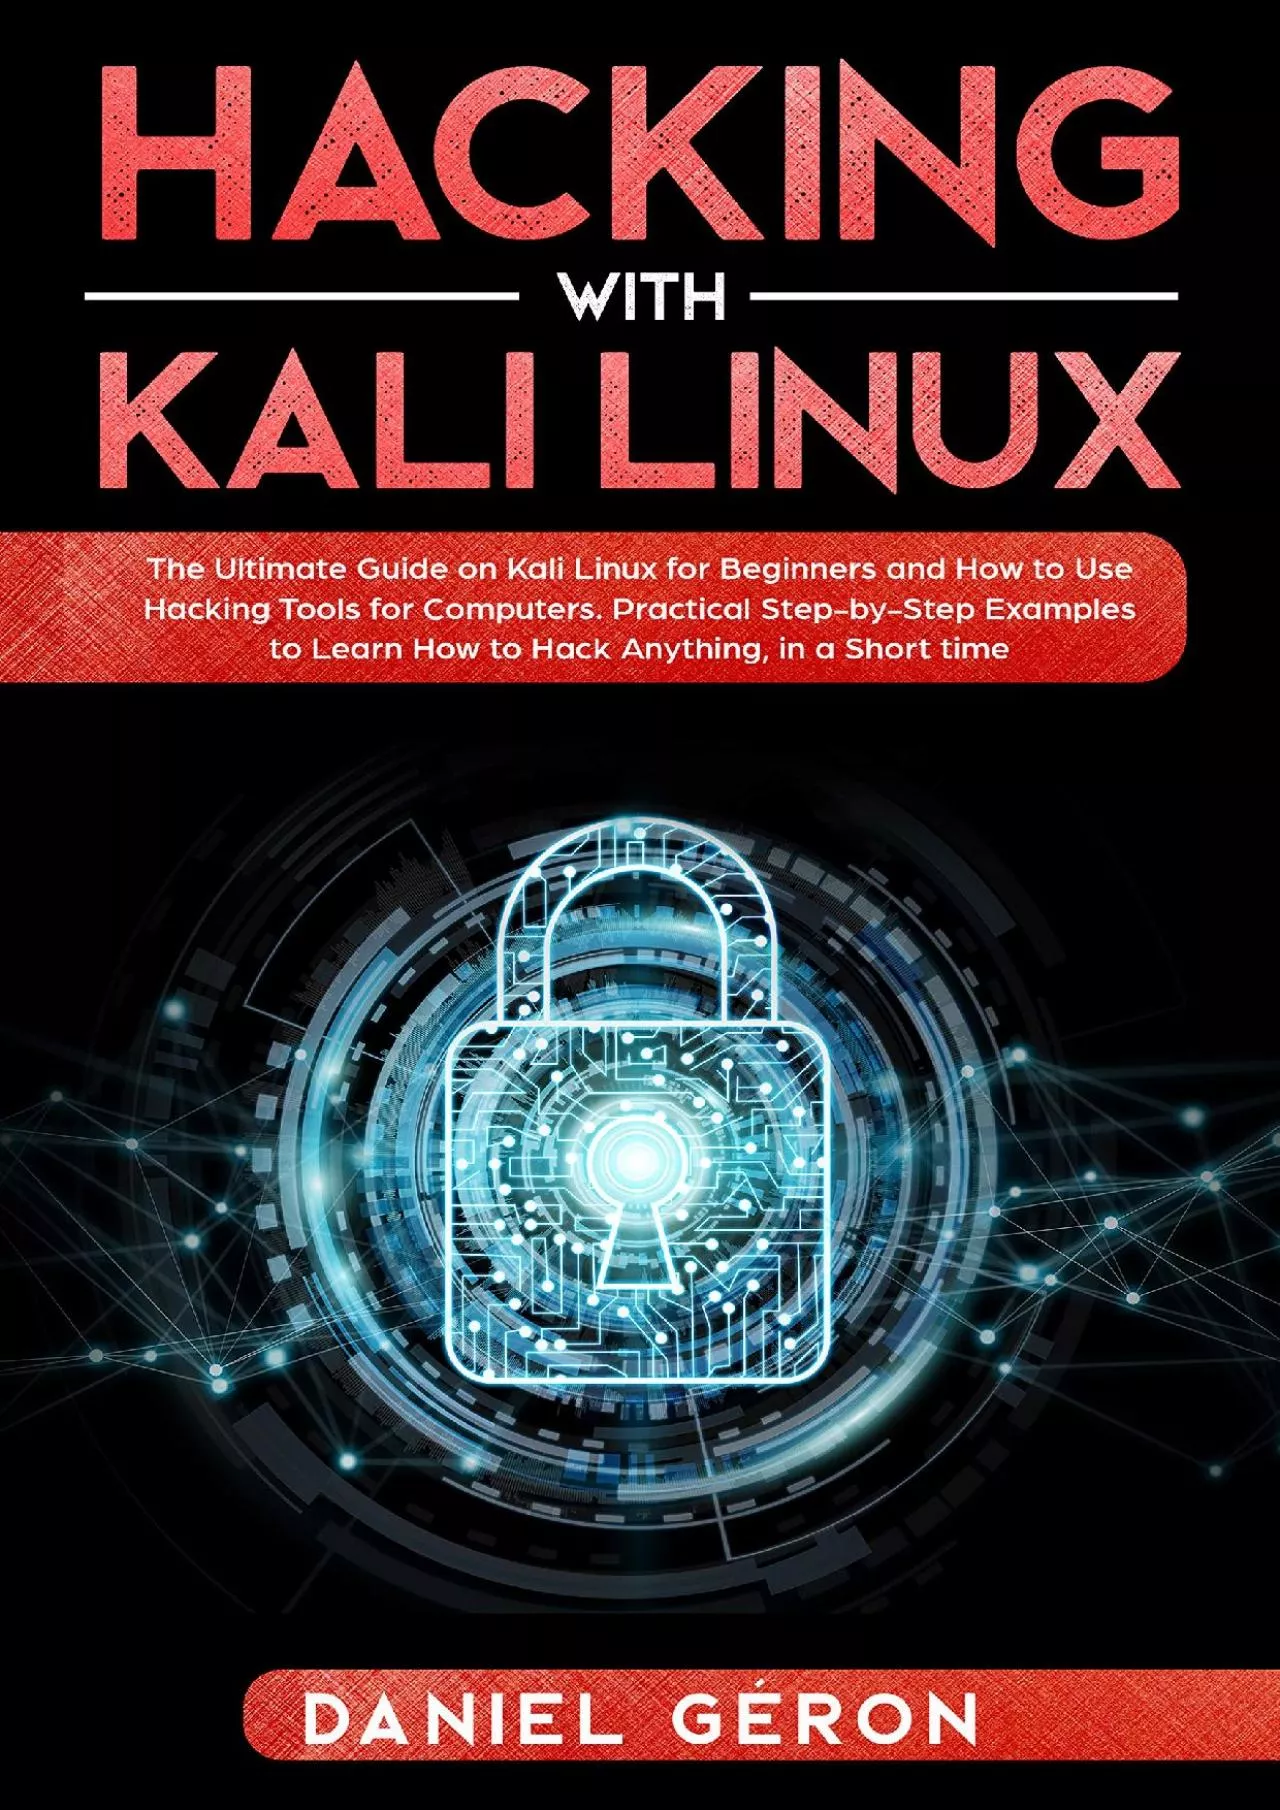 (EBOOK)-Hacking with Kali Linux: The Ultimate Guide on Kali Linux for Beginners and How